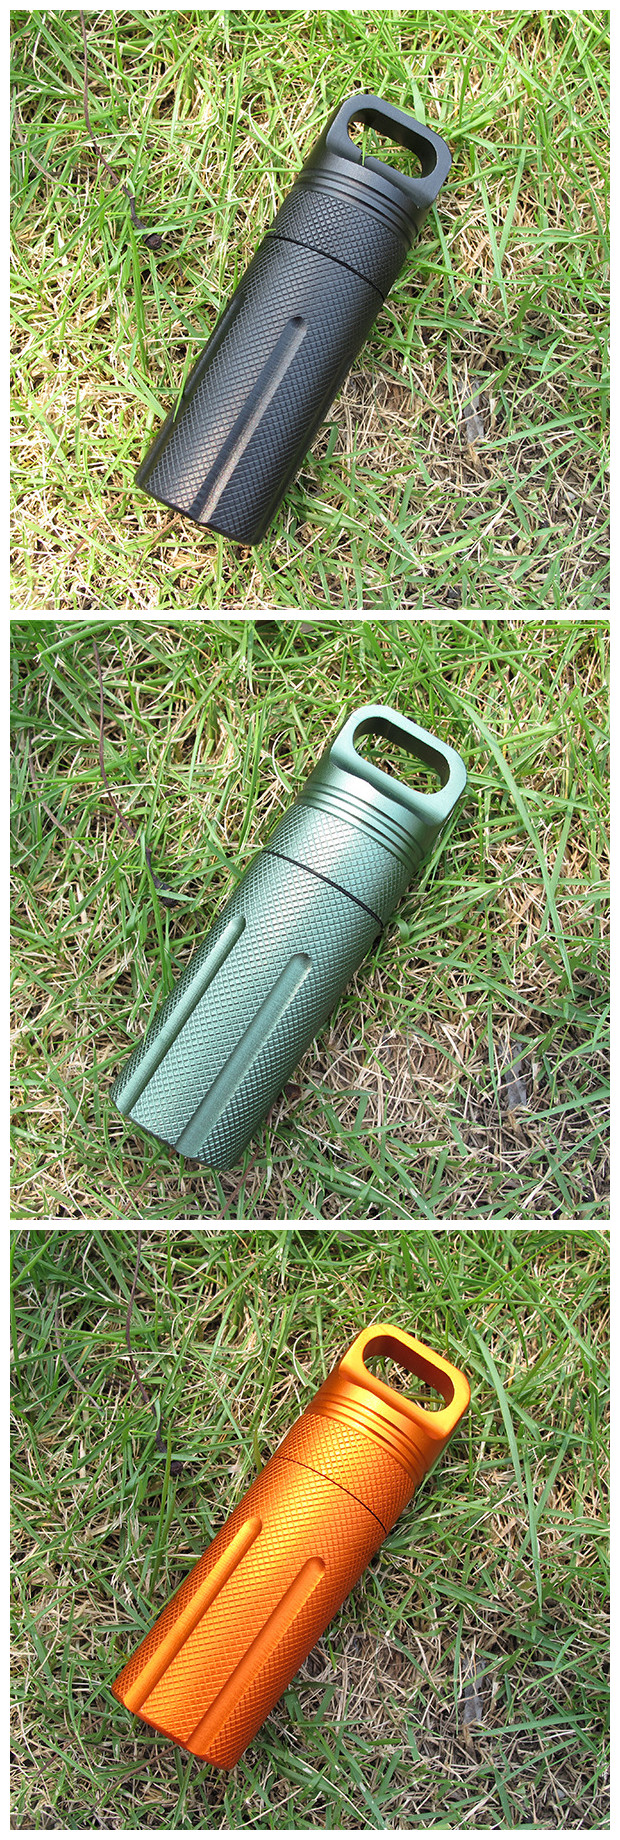 IPReetrade-Outdoor-CNC-Waterproof-Pill-Storage-Case-EDC-Seal-Canister-Survival-Emergency-Container-1080188-5